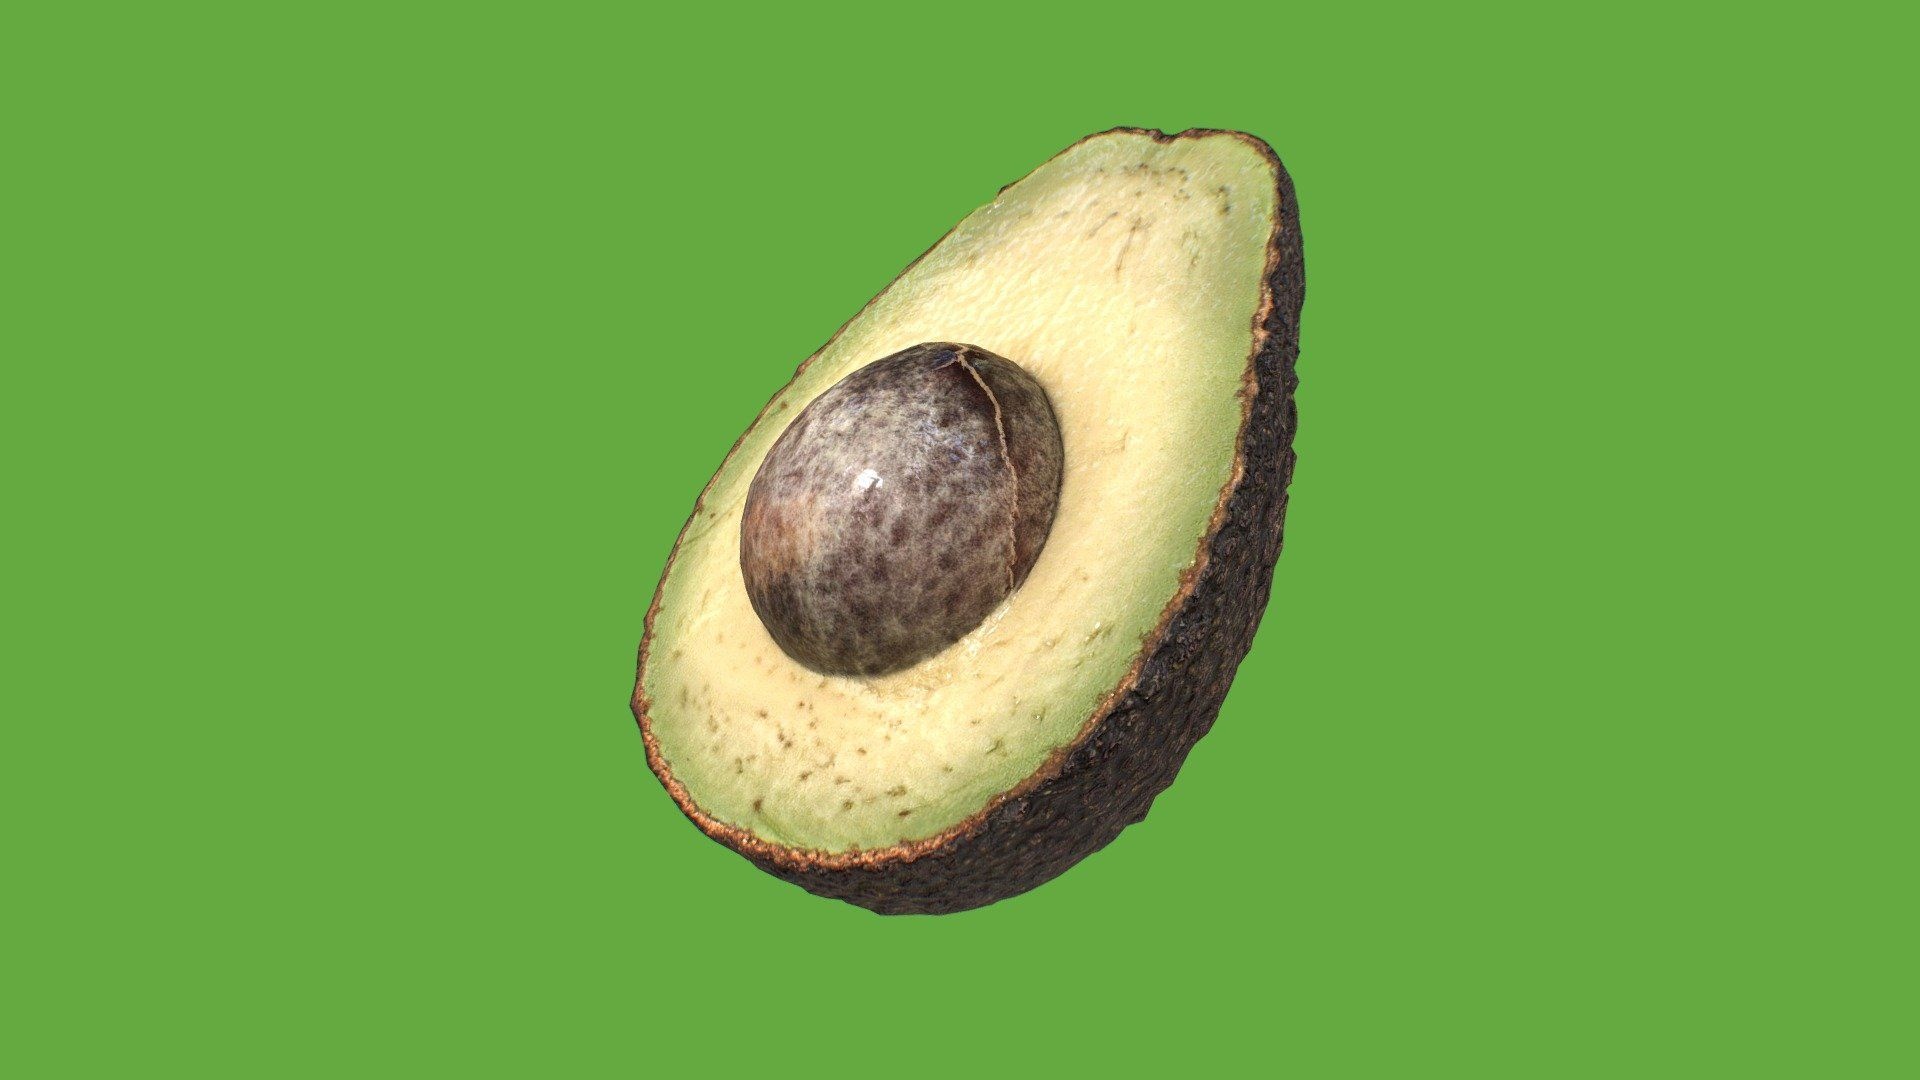 Avocado: A single-seeded berry that grows from the Persea americana tree. 1920x1080 Full HD Wallpaper.